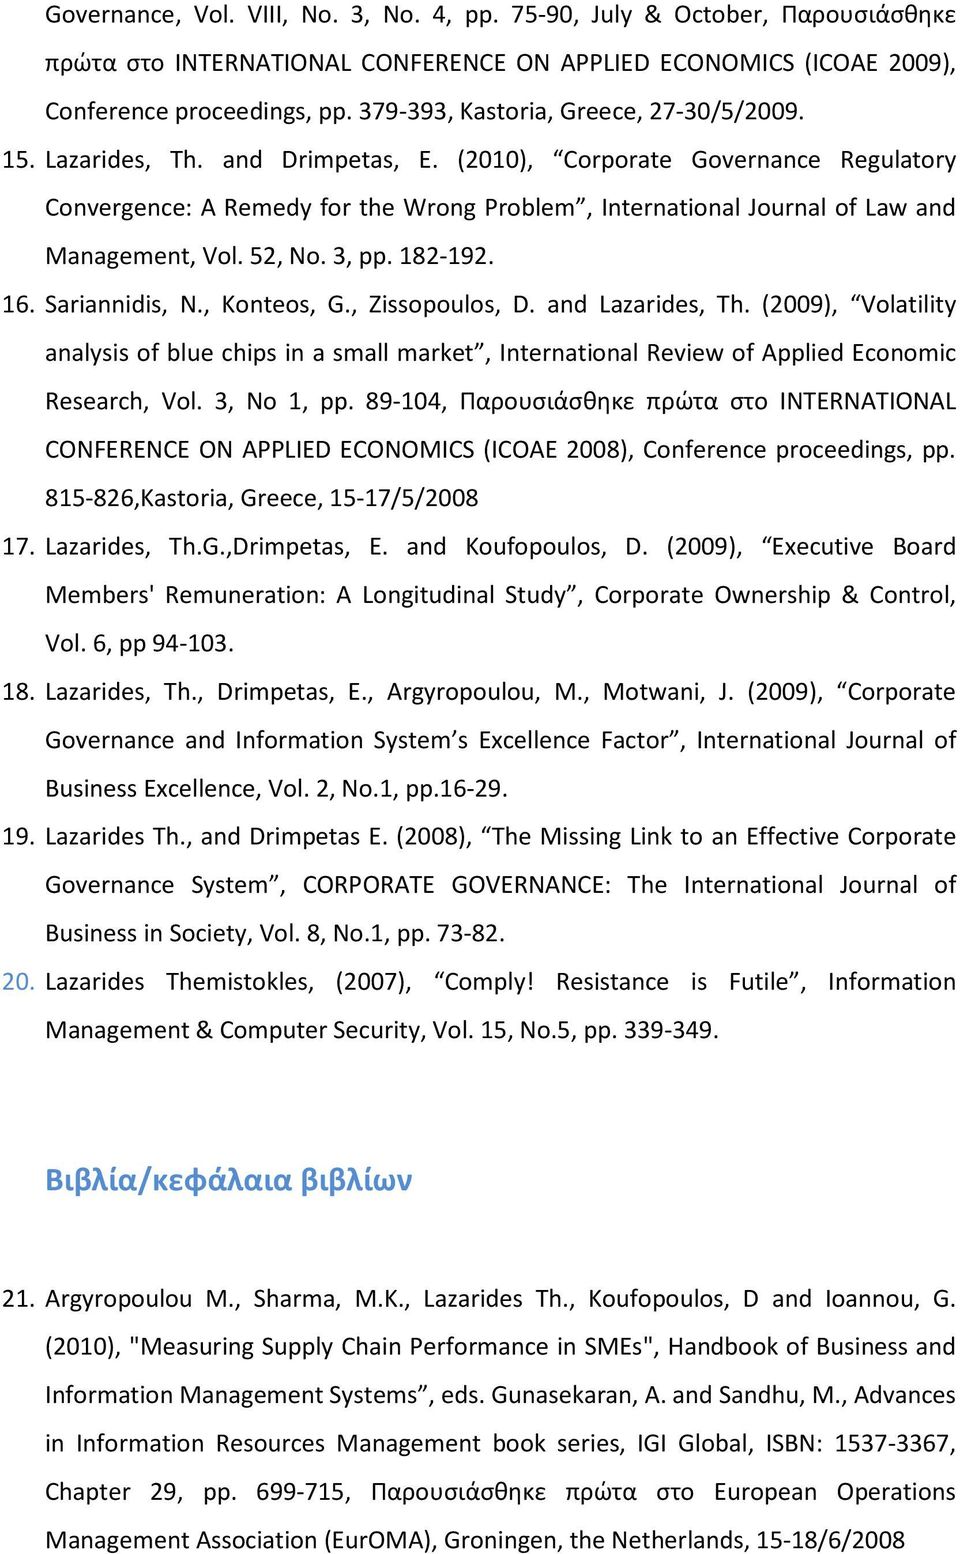 (2010), Corporate Governance Regulatory Convergence: A Remedy for the Wrong Problem, International Journal of Law and Management, Vol. 52, No. 3, pp. 182-192. 16. Sariannidis, N., Konteos, G.